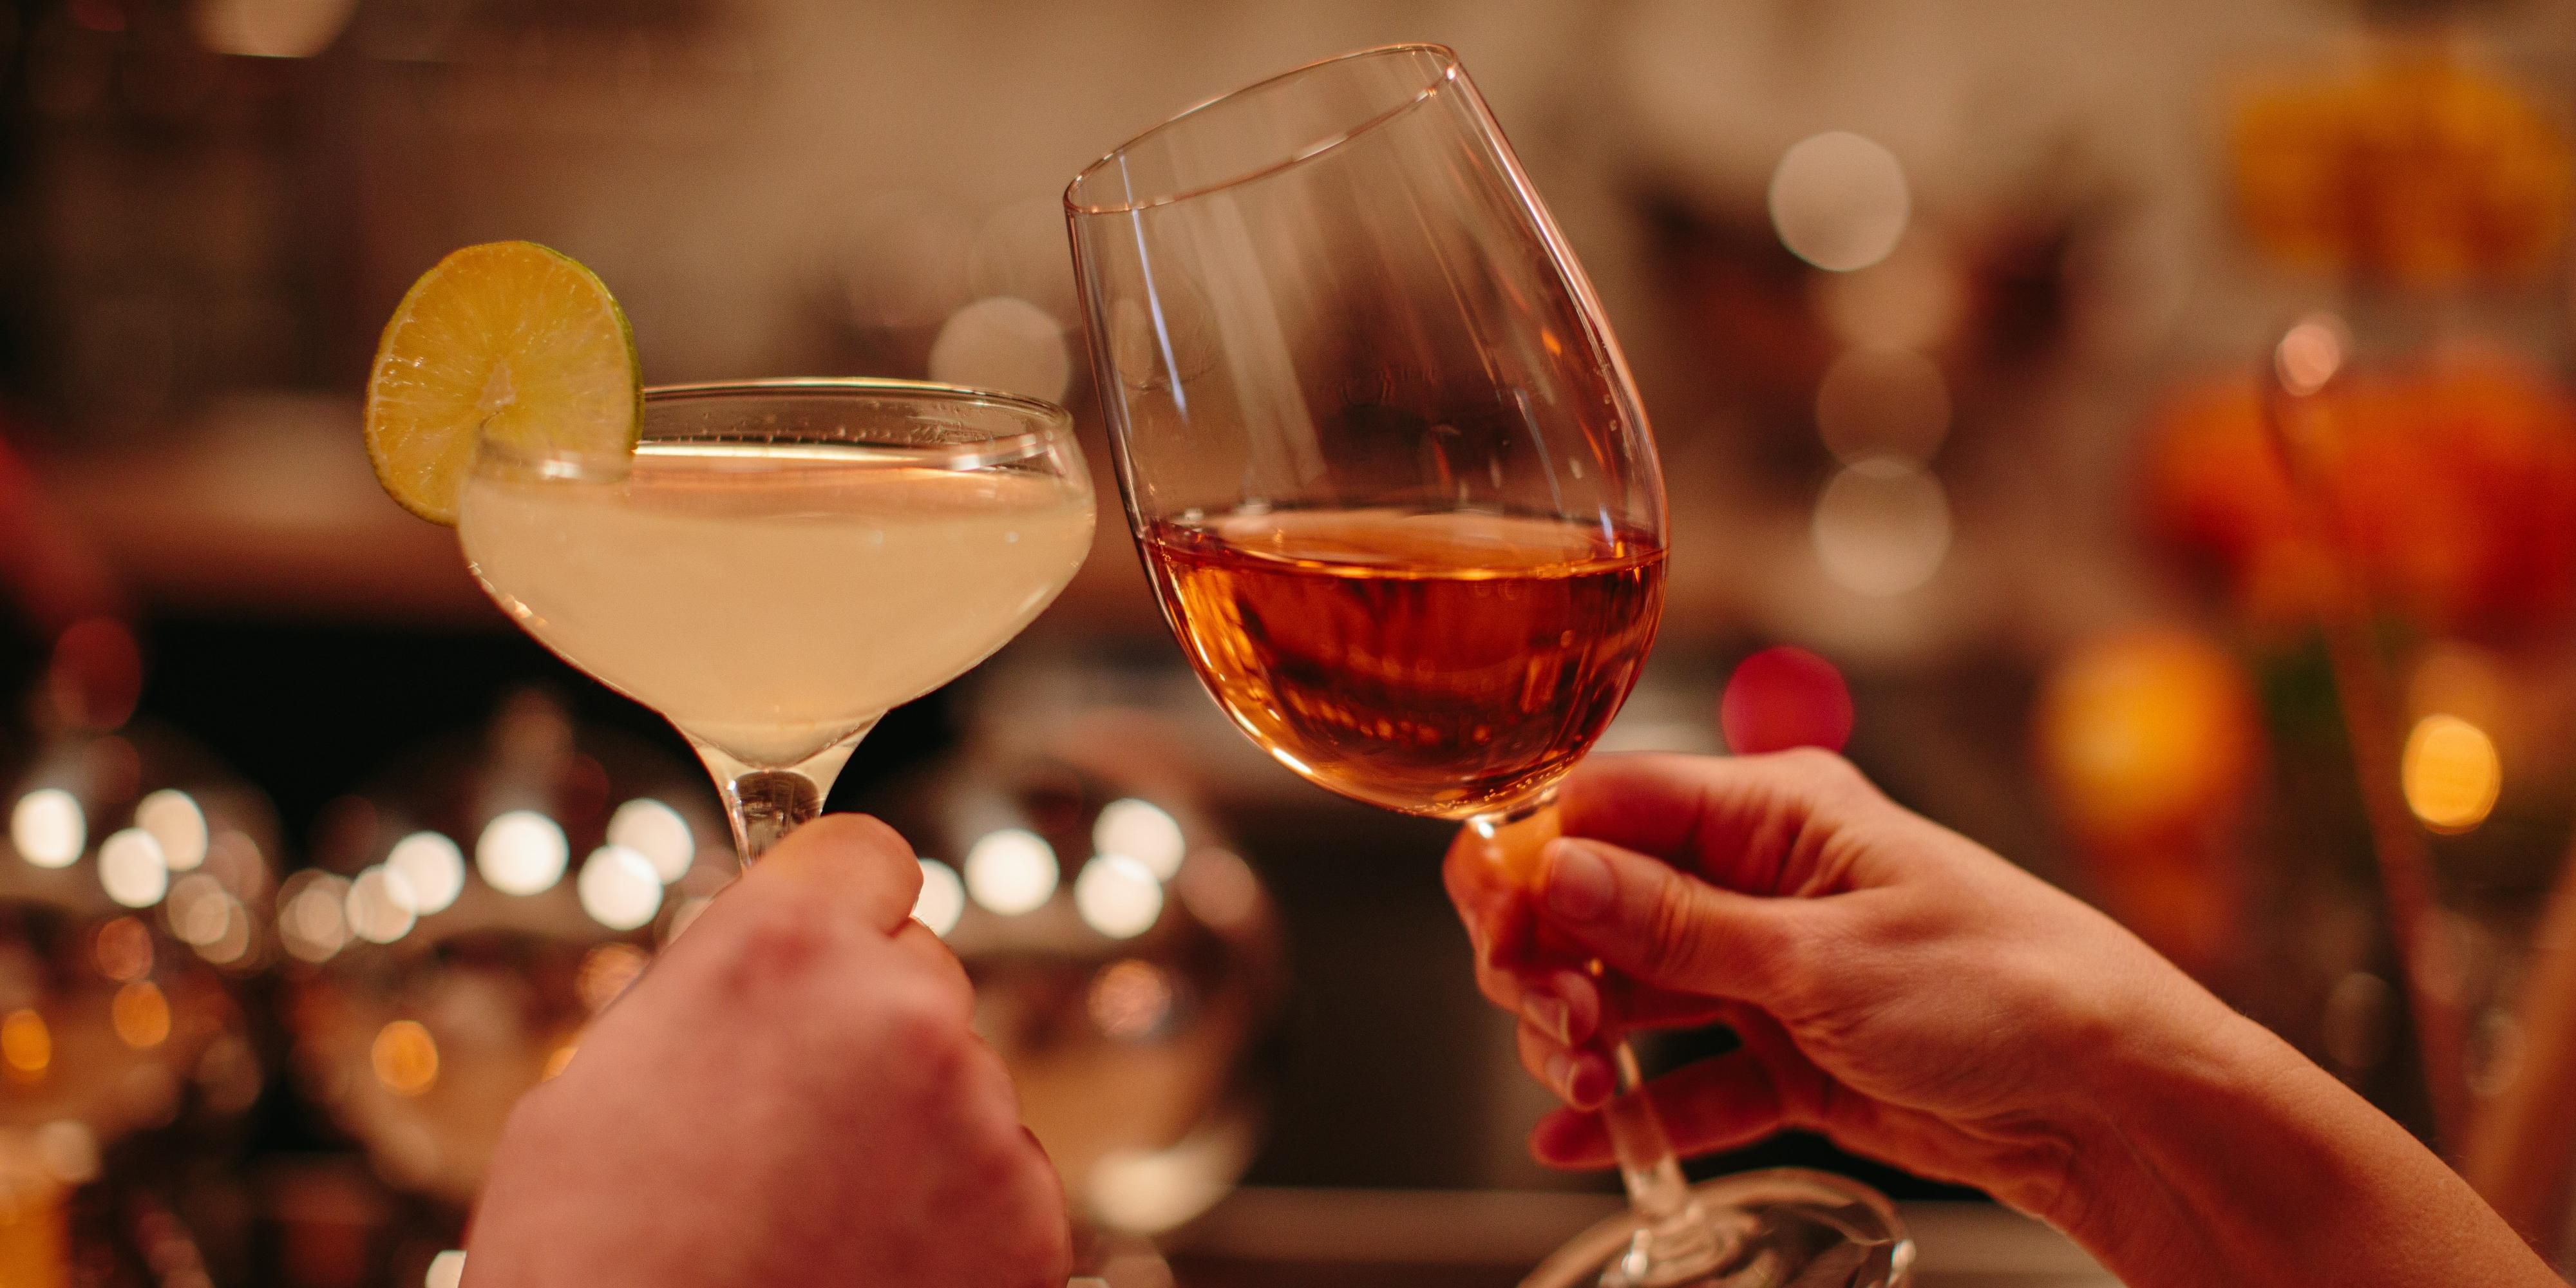 Explore Our Wide Selection of Local Wines & Handcrafted Cocktails